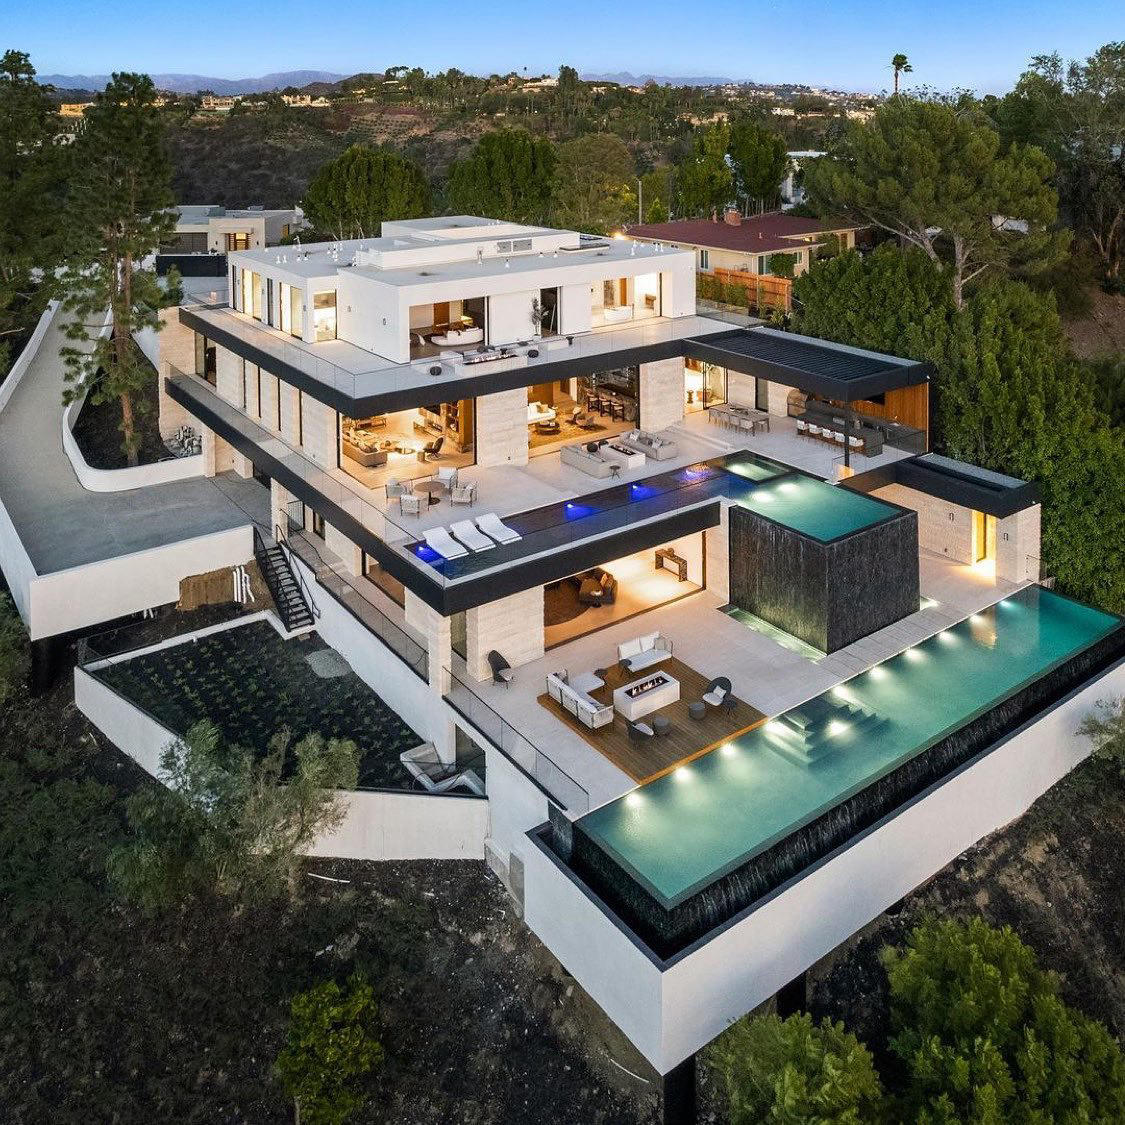 Luxury Real Estate - Tag a Friend who needs to see this Modern Mansion